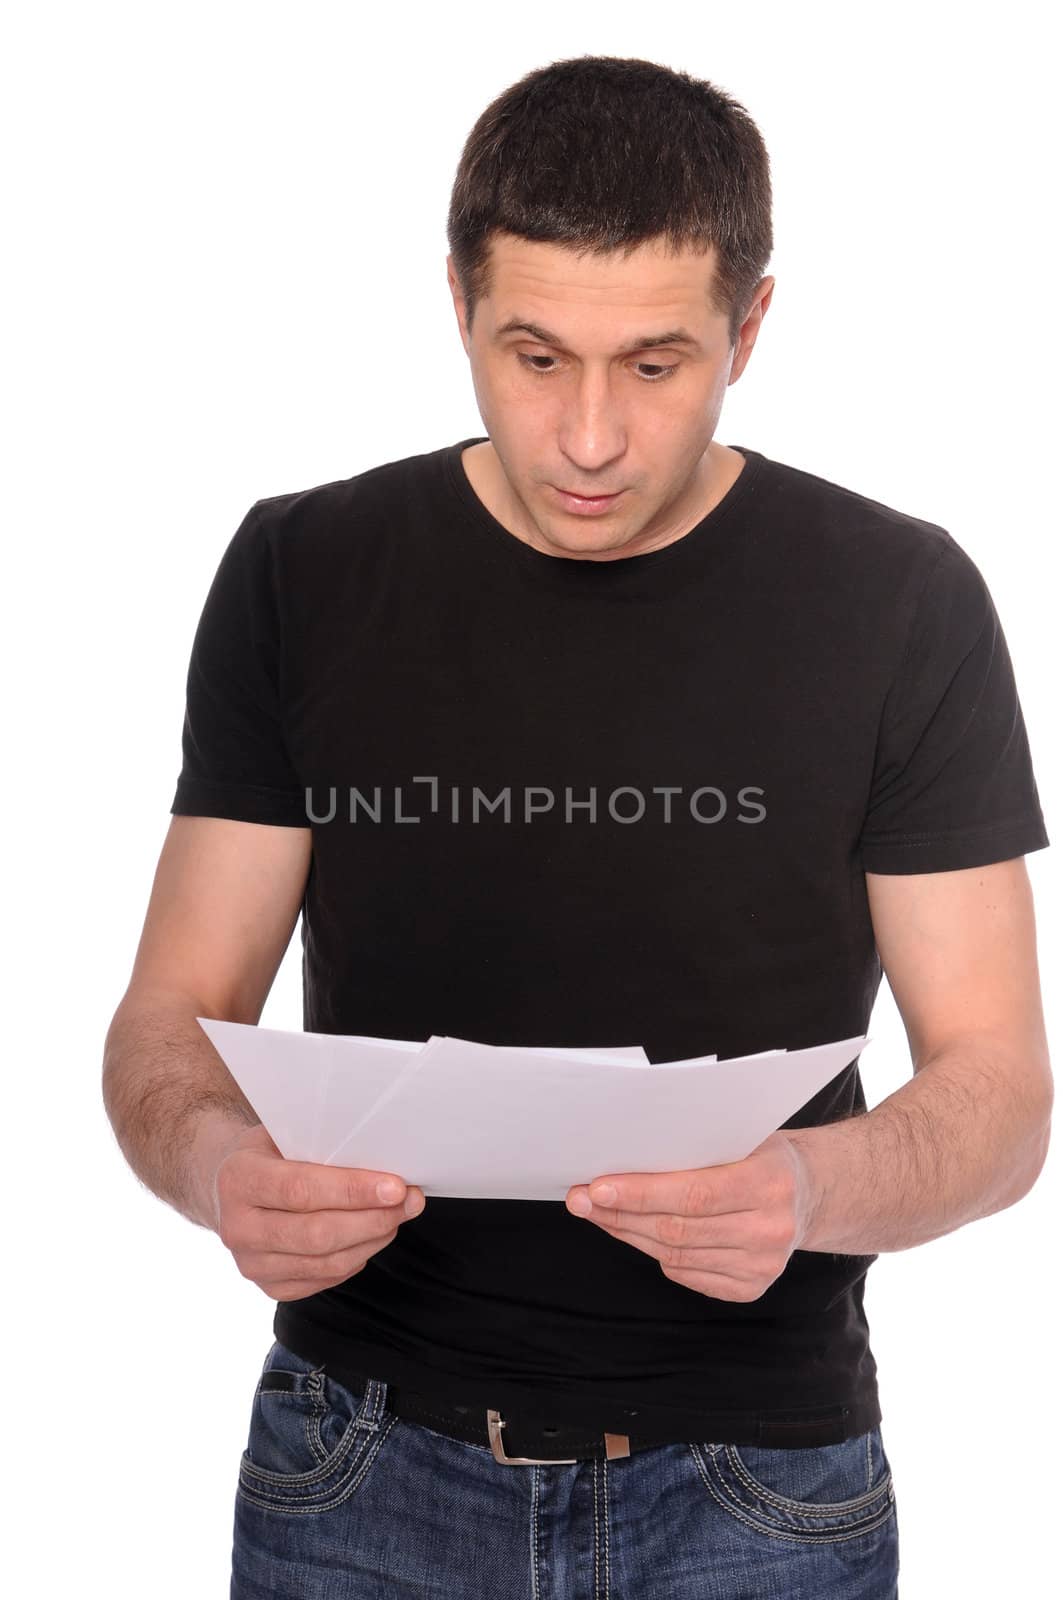 surprised by a man reading documents isolated on white background